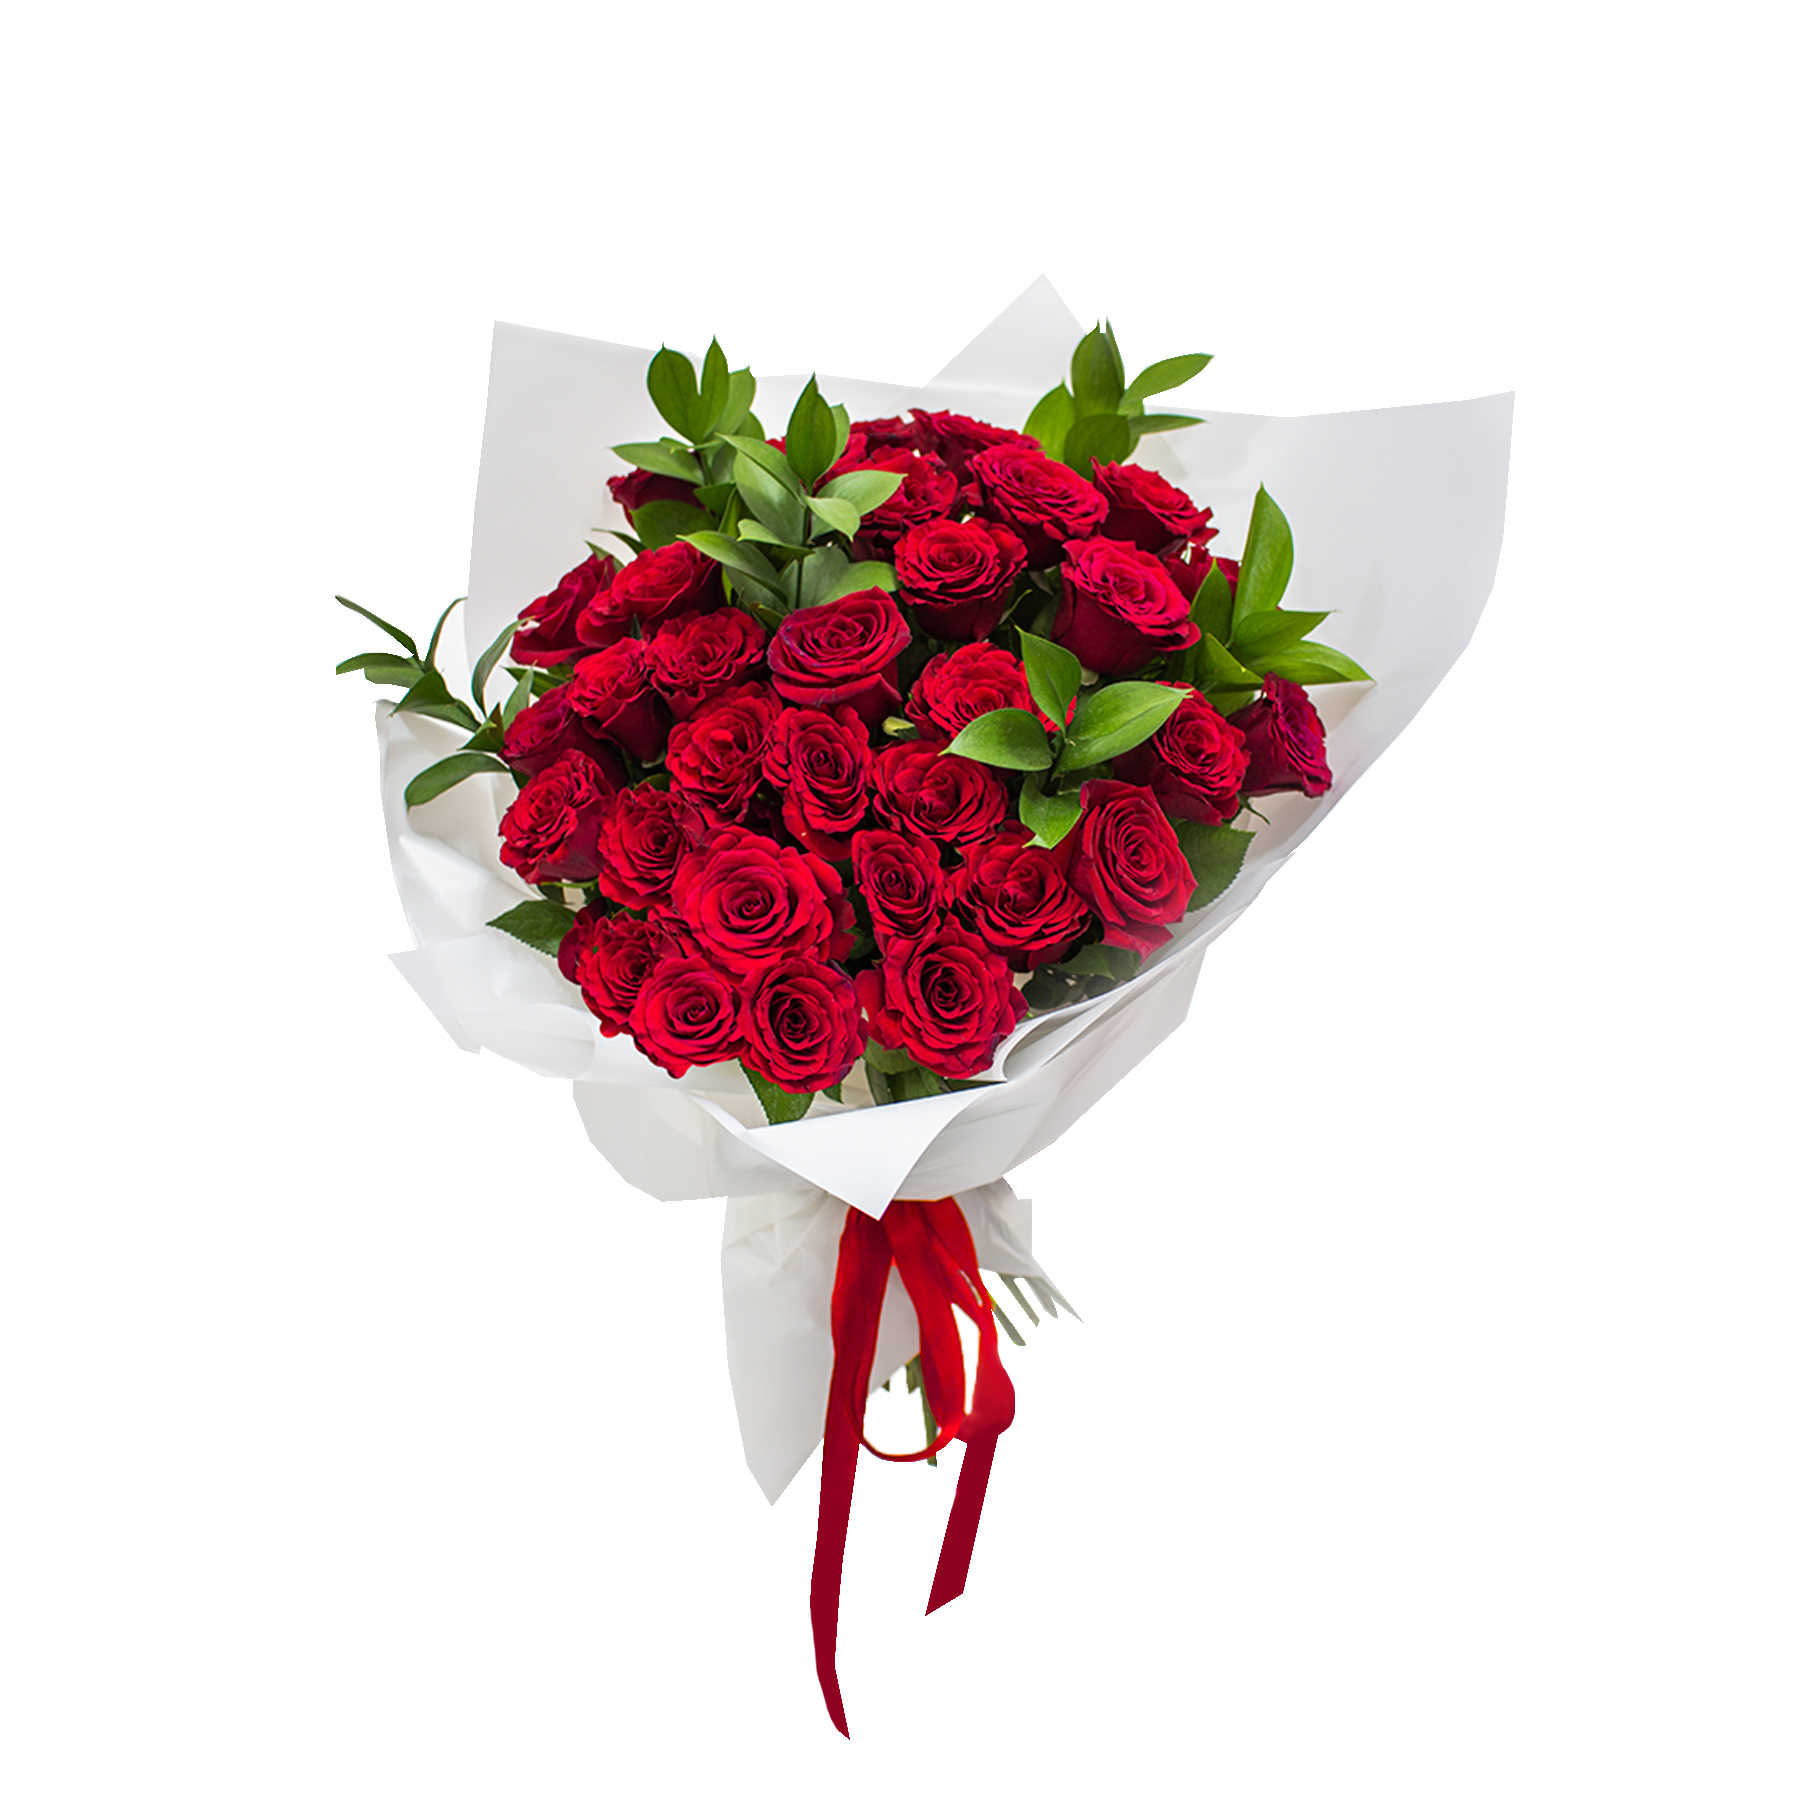 bouqute-of-red-roses-30-pcs-with-white-wrapping1